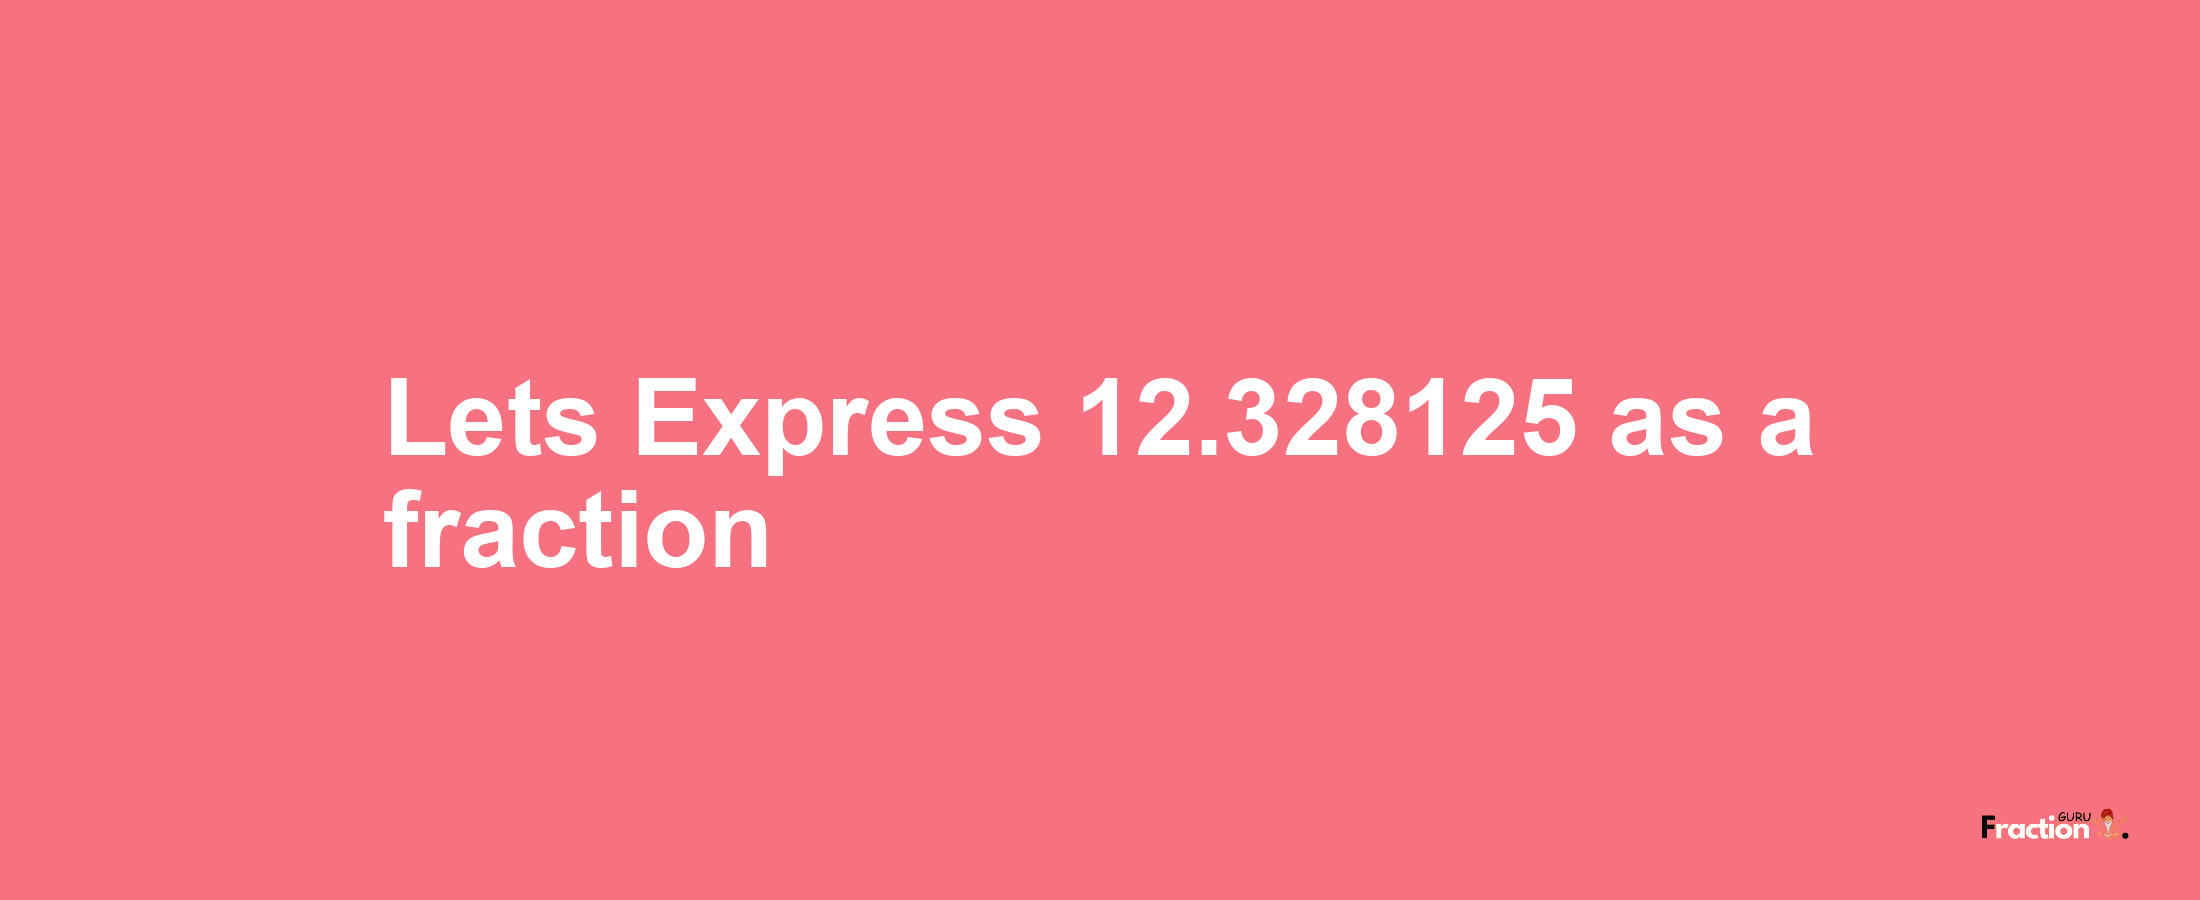 Lets Express 12.328125 as afraction